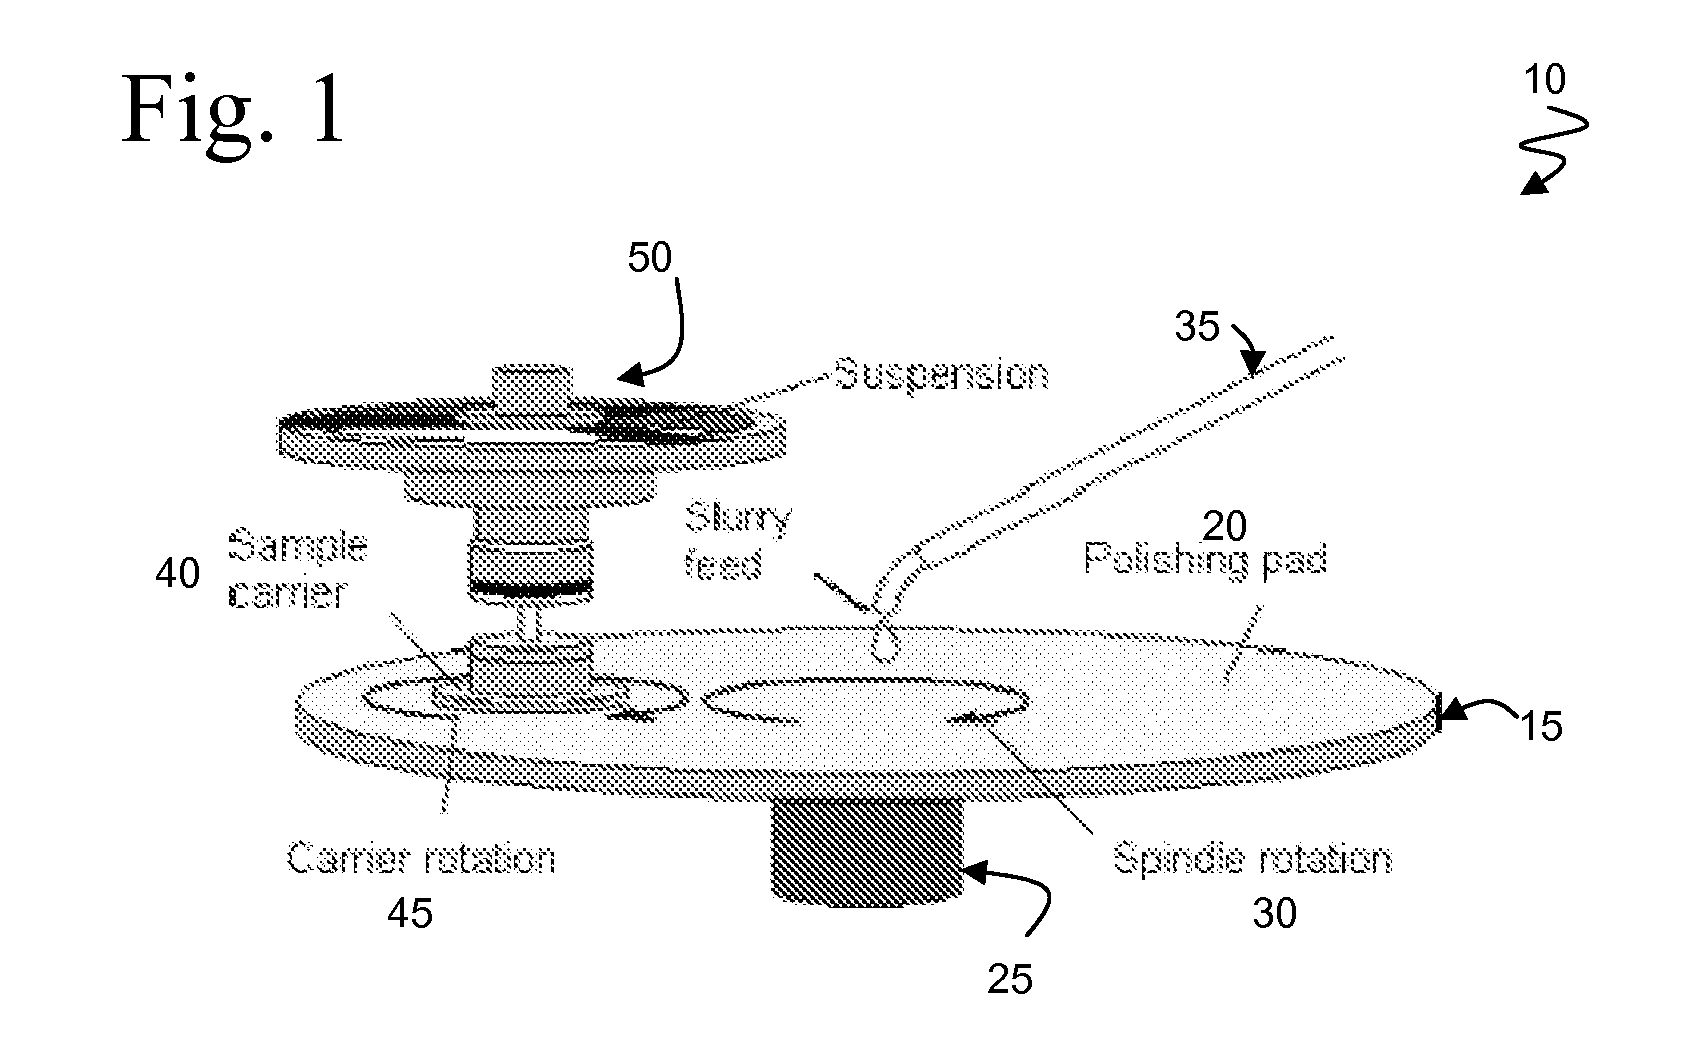 System and Method for the Identification of Chemical Mechanical Planarization Defects